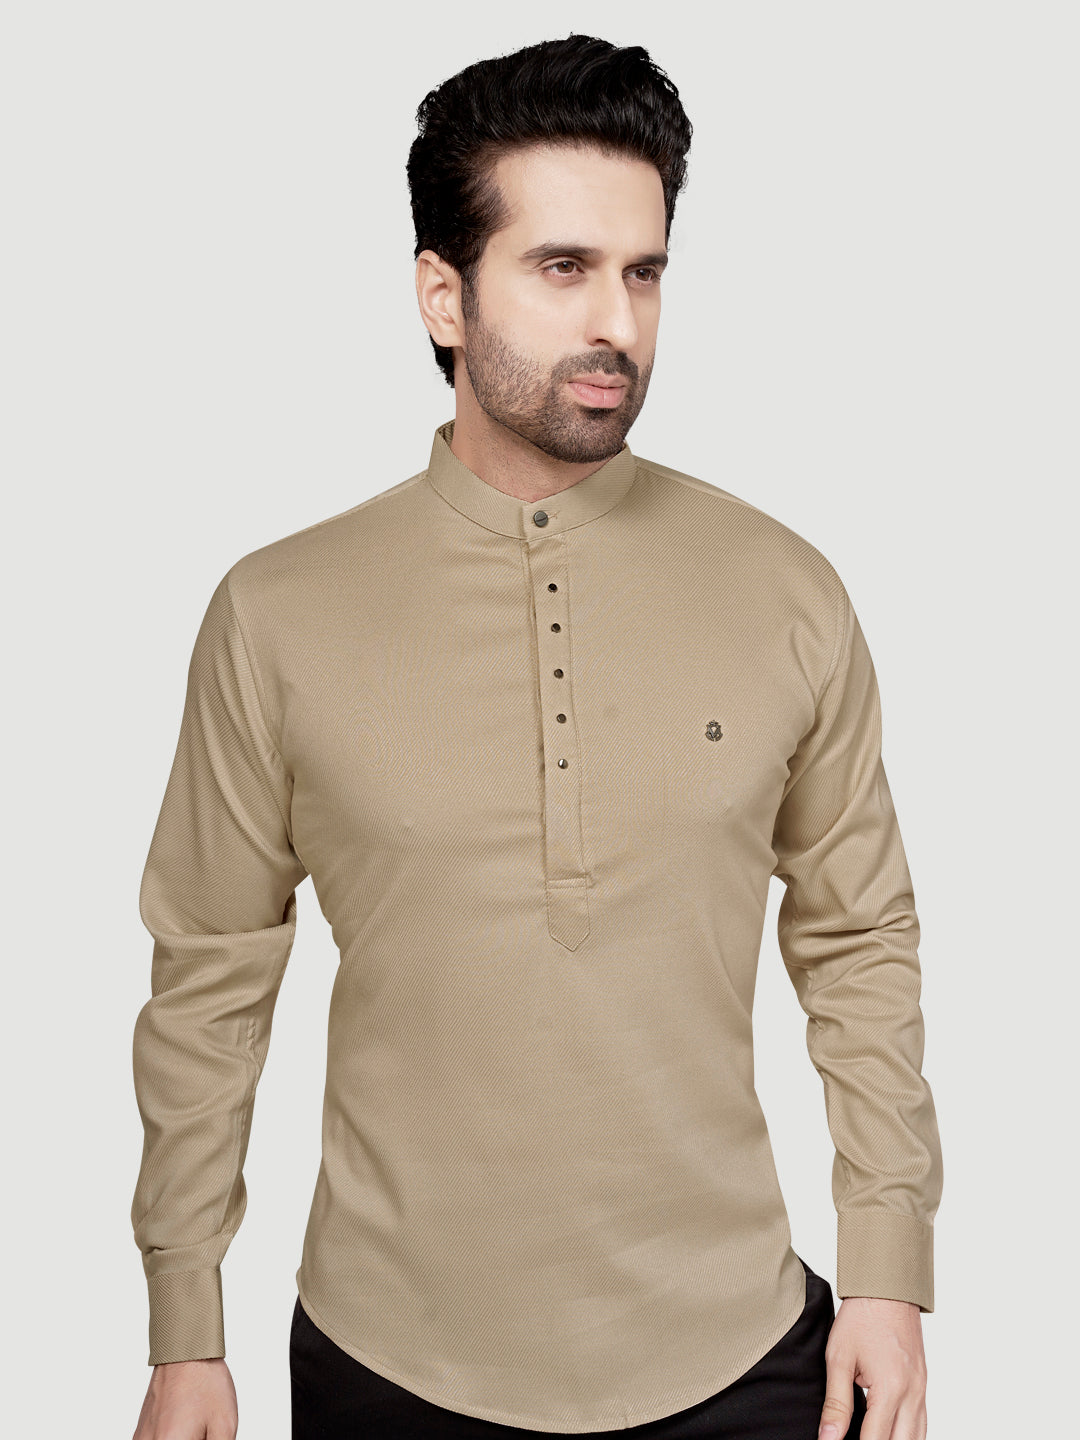 Black and White Men's Designer Short Kurta with Metal Buttons Ivory